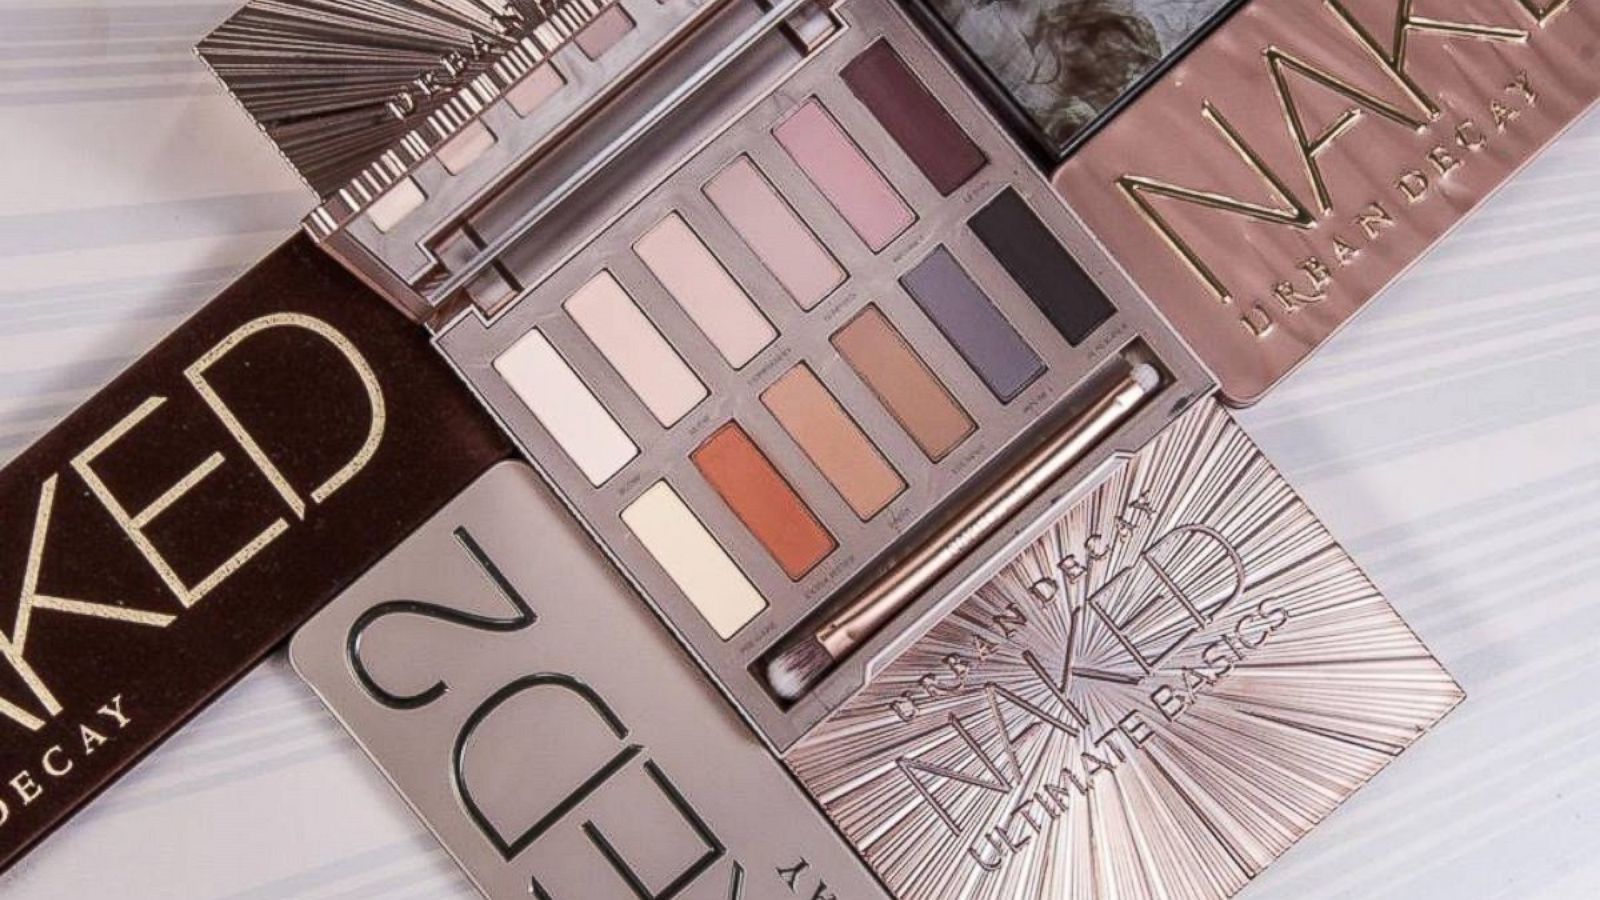 The Untold Story Behind Urban Decay Cosmetics - ABC News